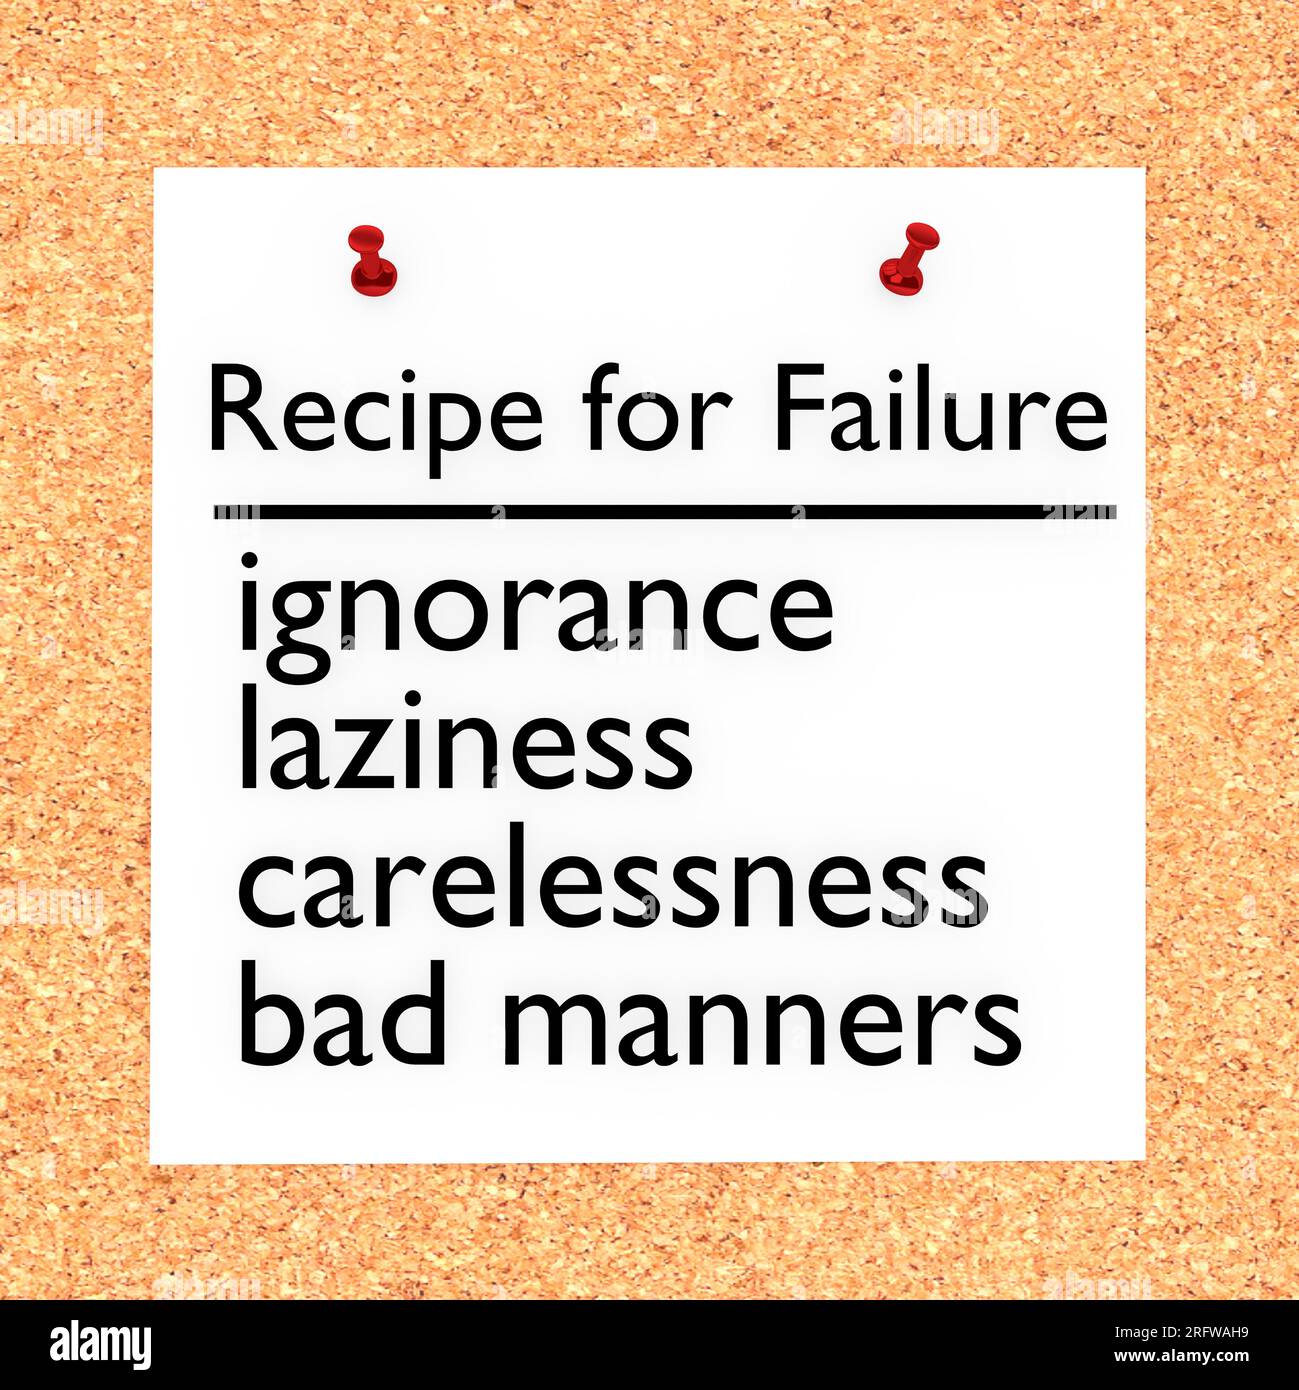 3D illustration of Recipe for Failure on a cork board: ignorance, laziness, carelessness, bad manners. Stock Photo